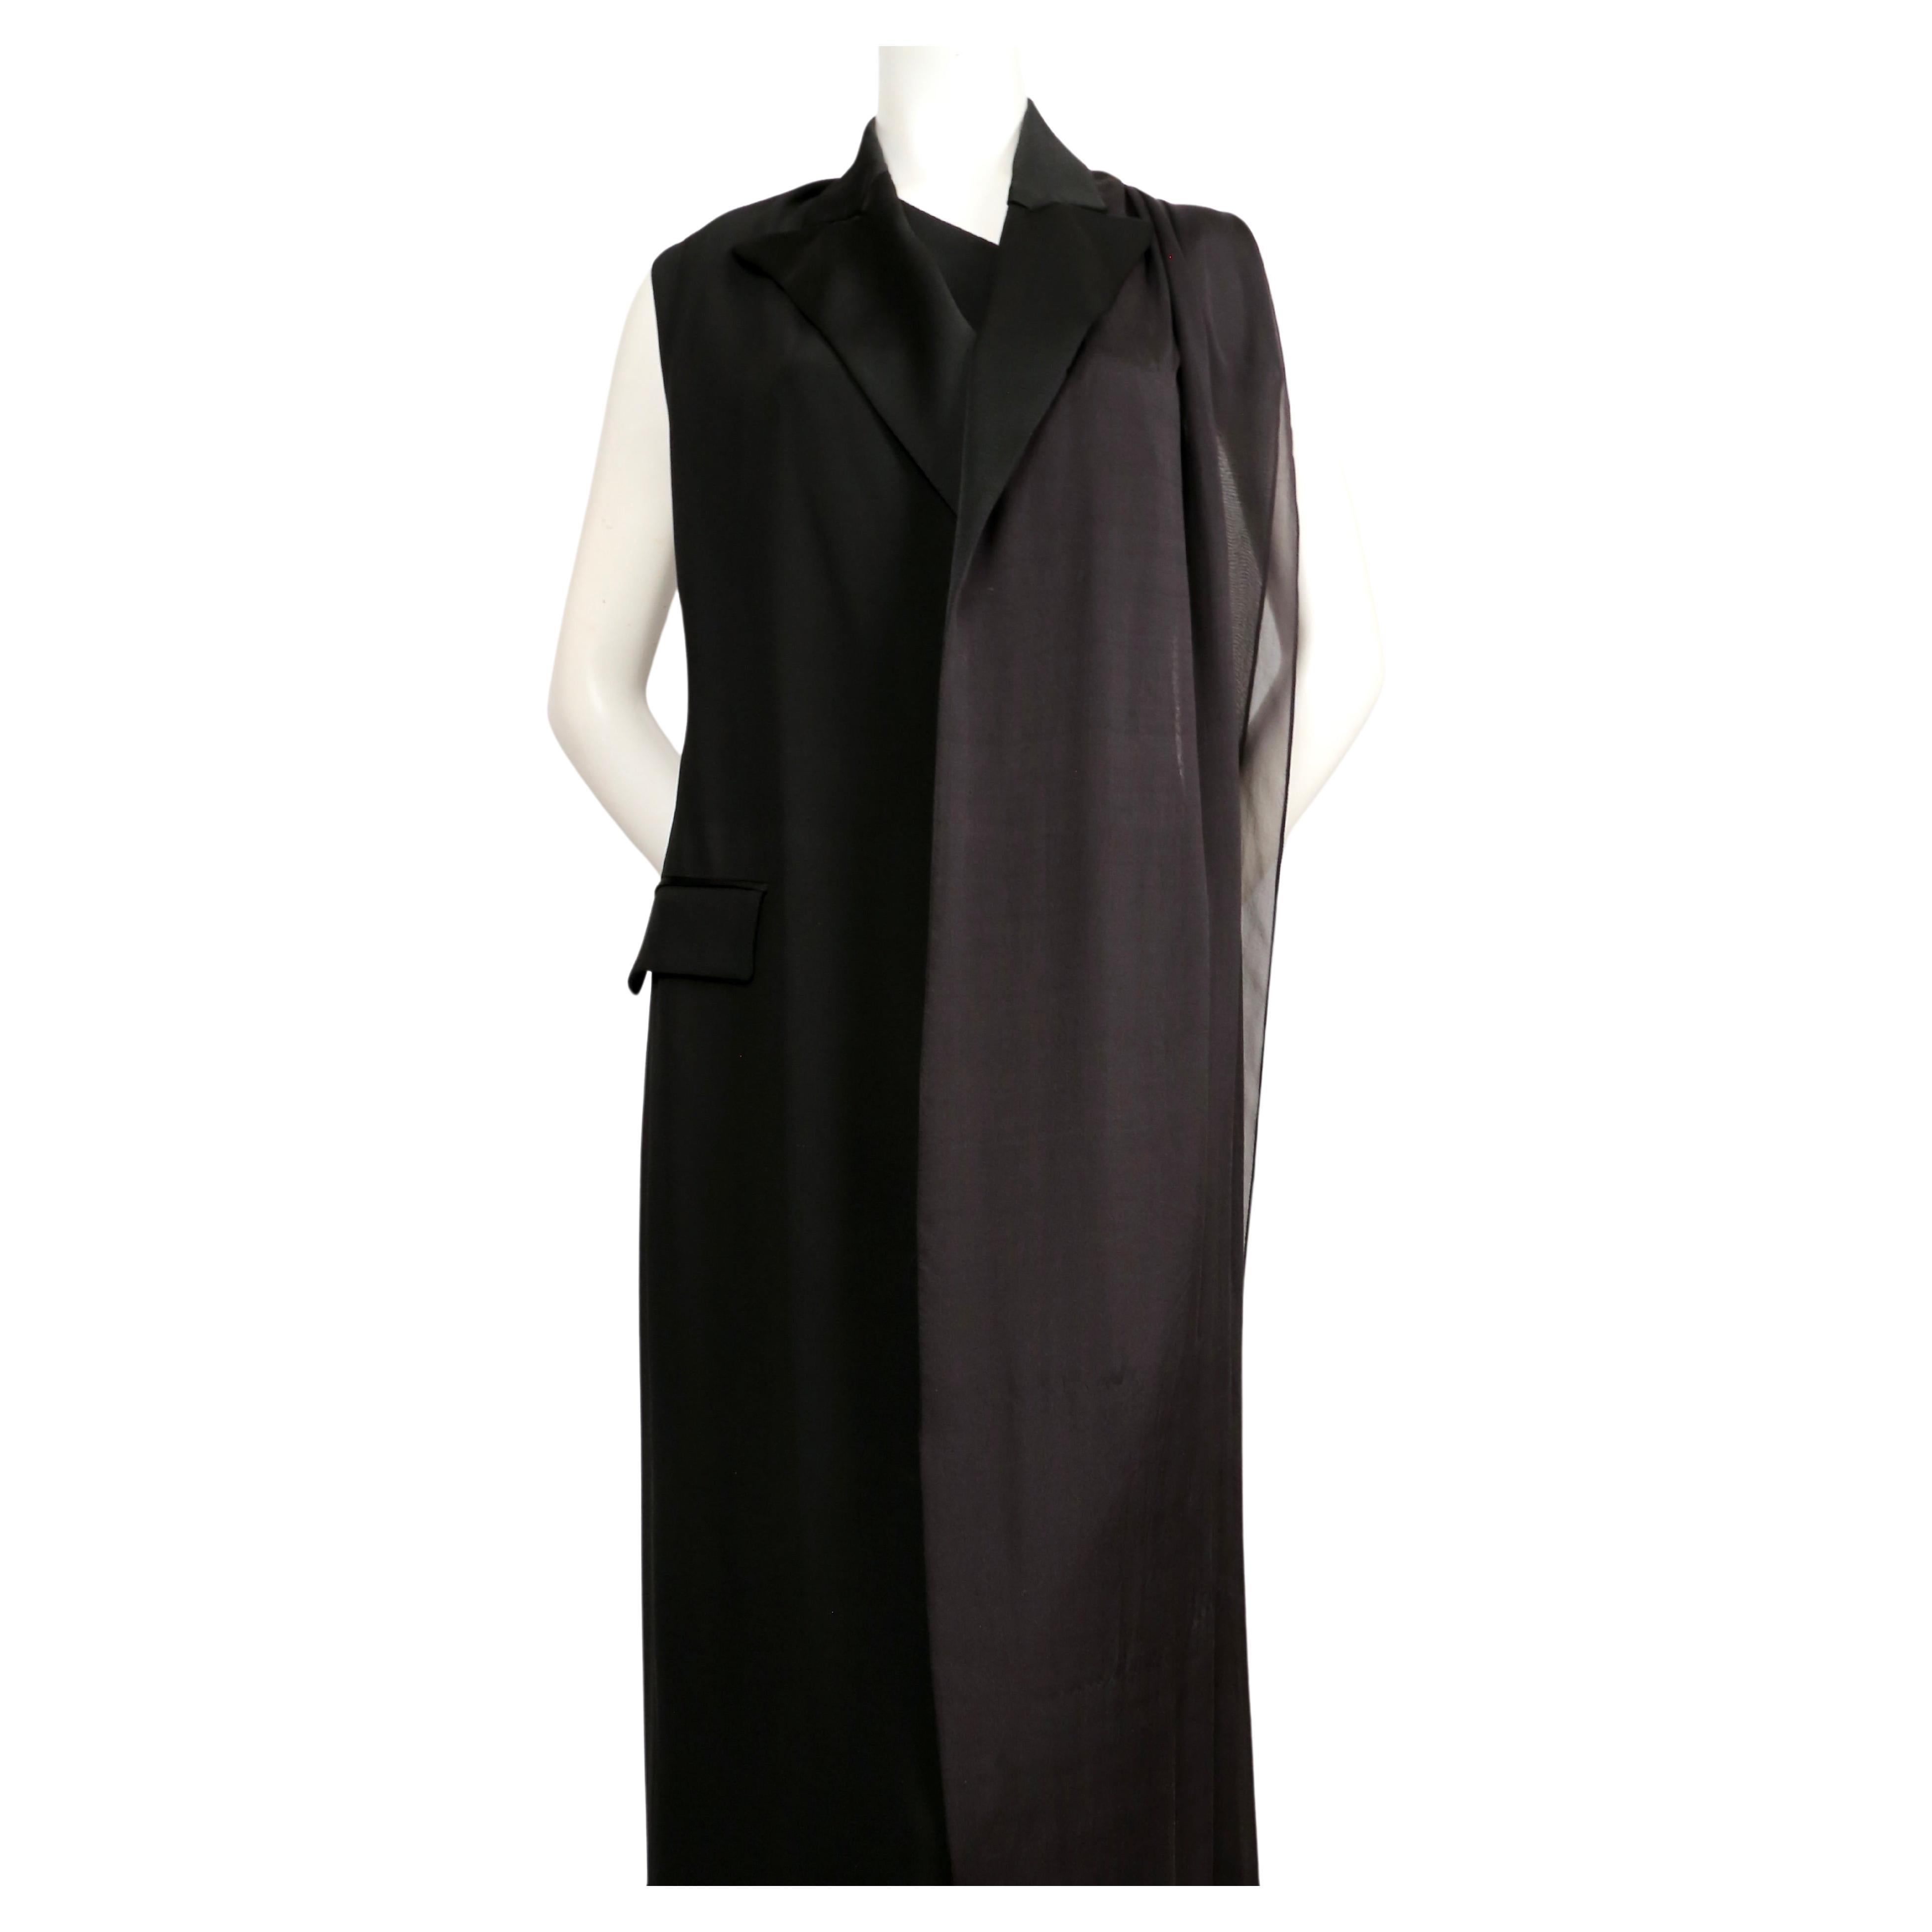 JEAN PAUL GAULTIER black tuxedo gown with draped silk scarf In Good Condition For Sale In San Fransisco, CA